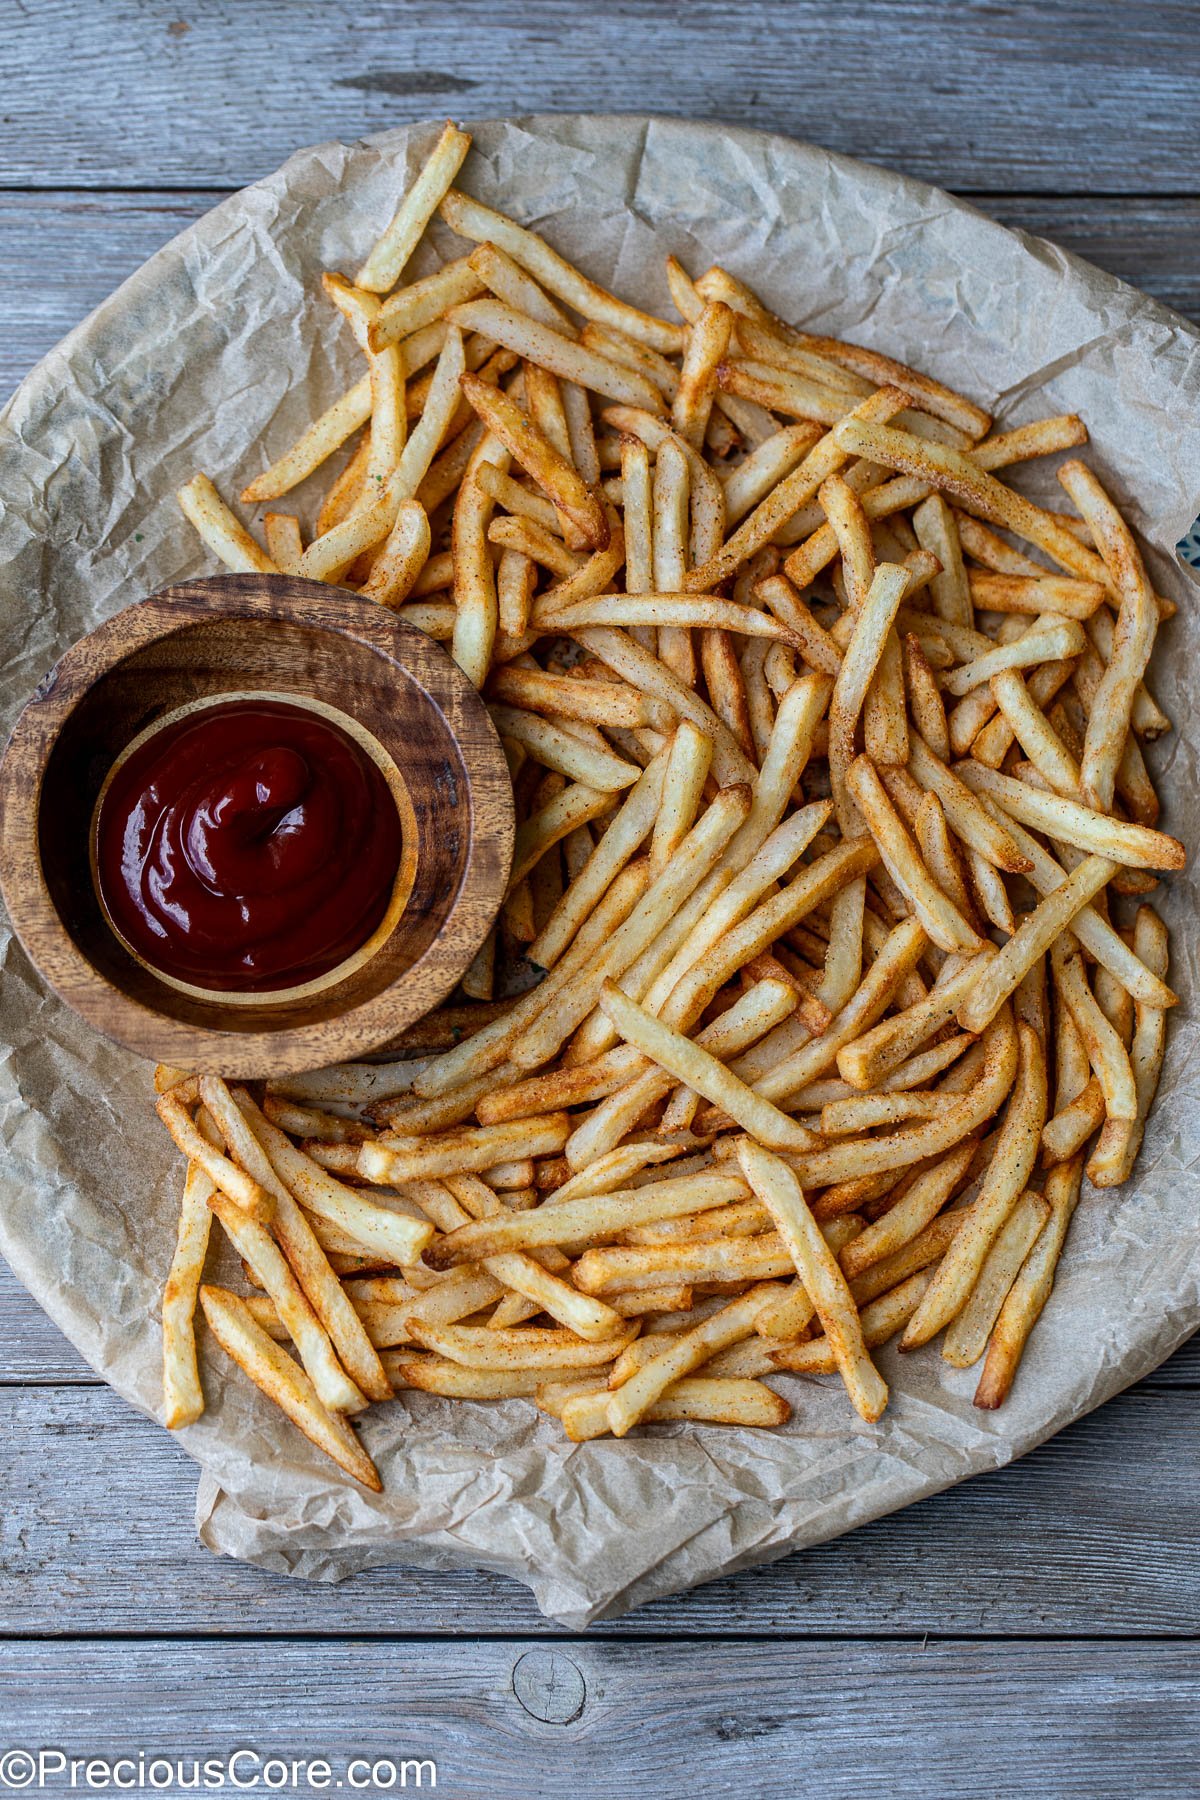 Fries on a round serving platter with a bowl of ketchup nearby.